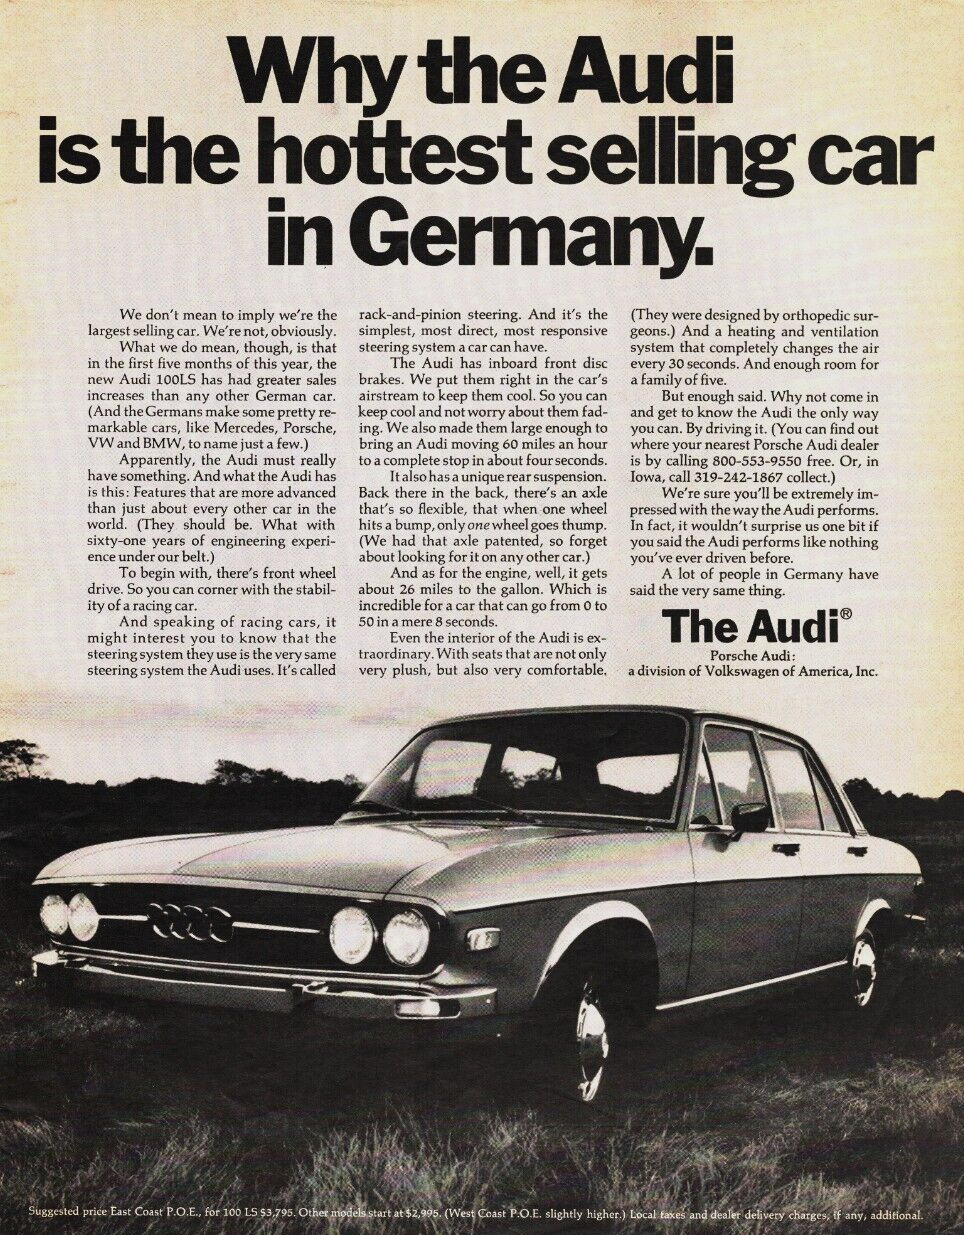 Vintage 1971 Audi Print Ad Hottest Selling in Germany Full Page Advertisement